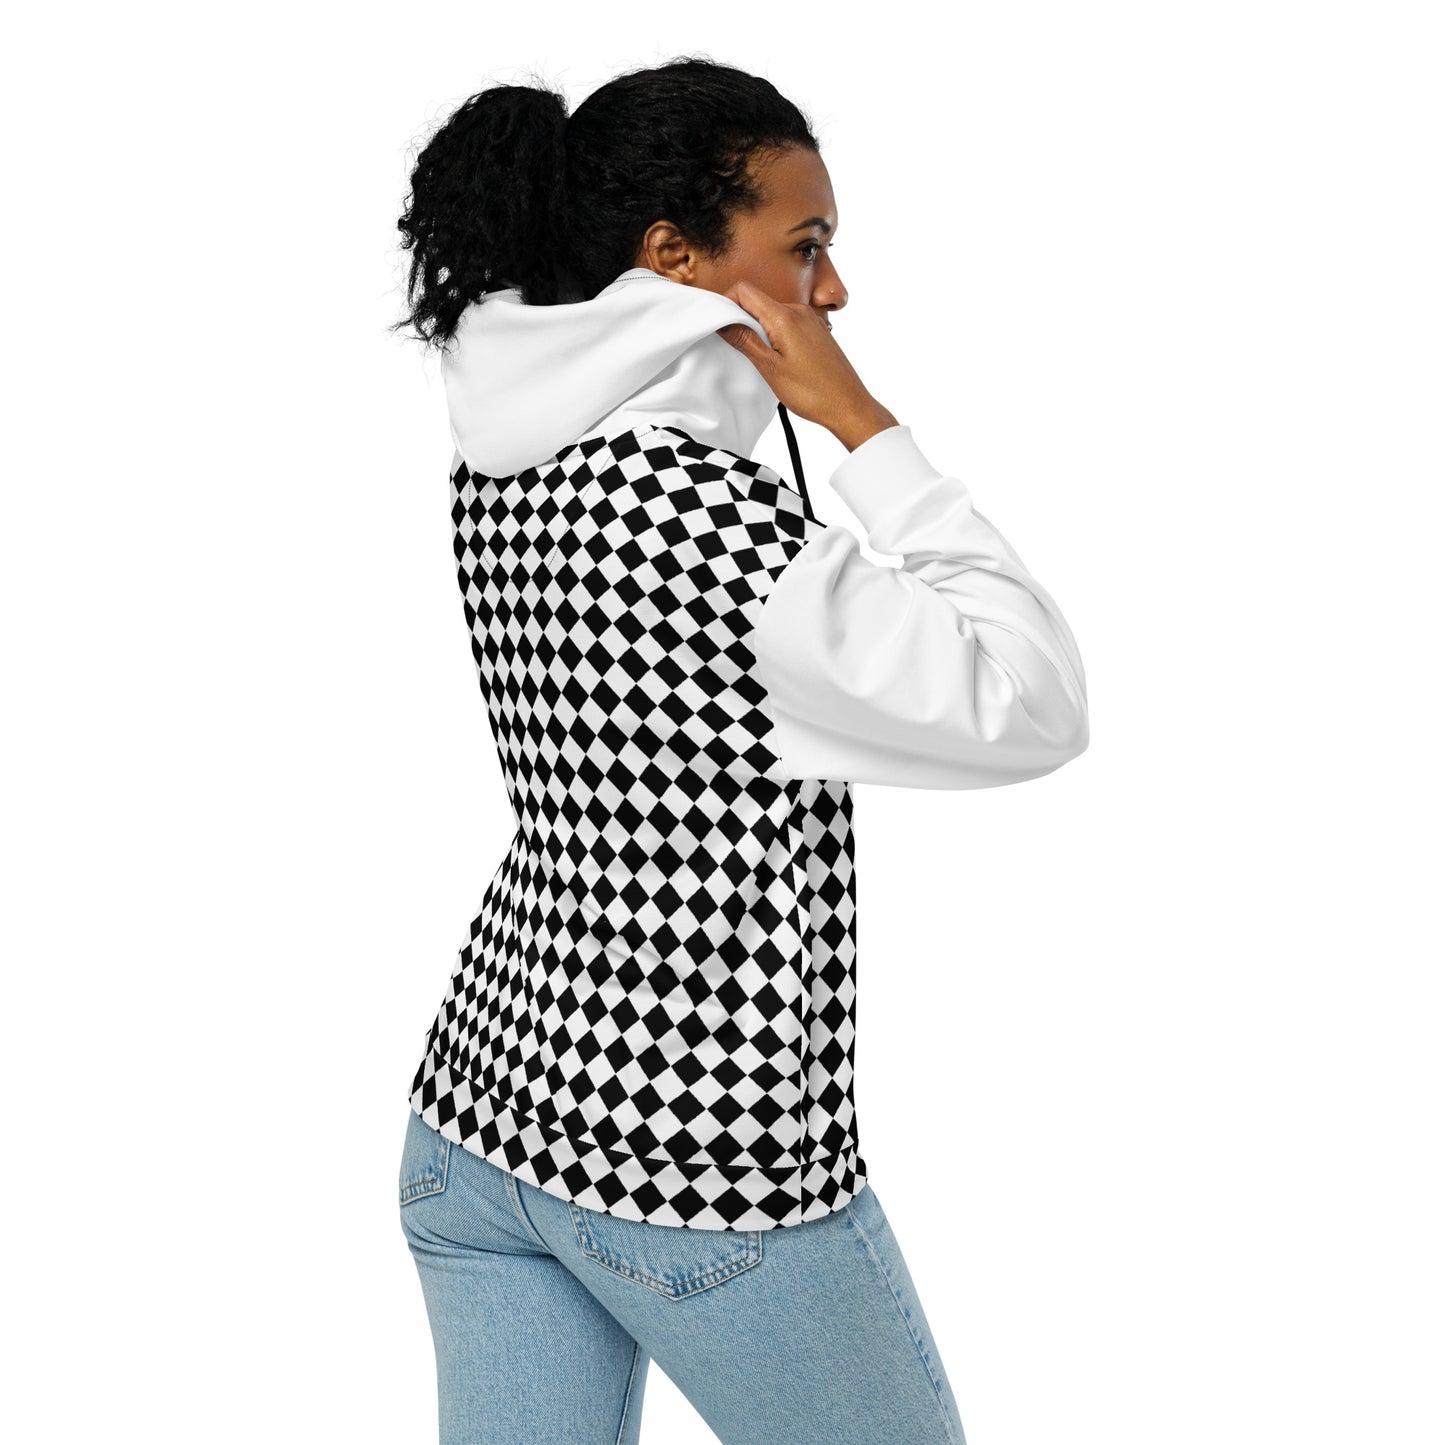 Woman with a white zip hoodie with the picture of a Chessboard